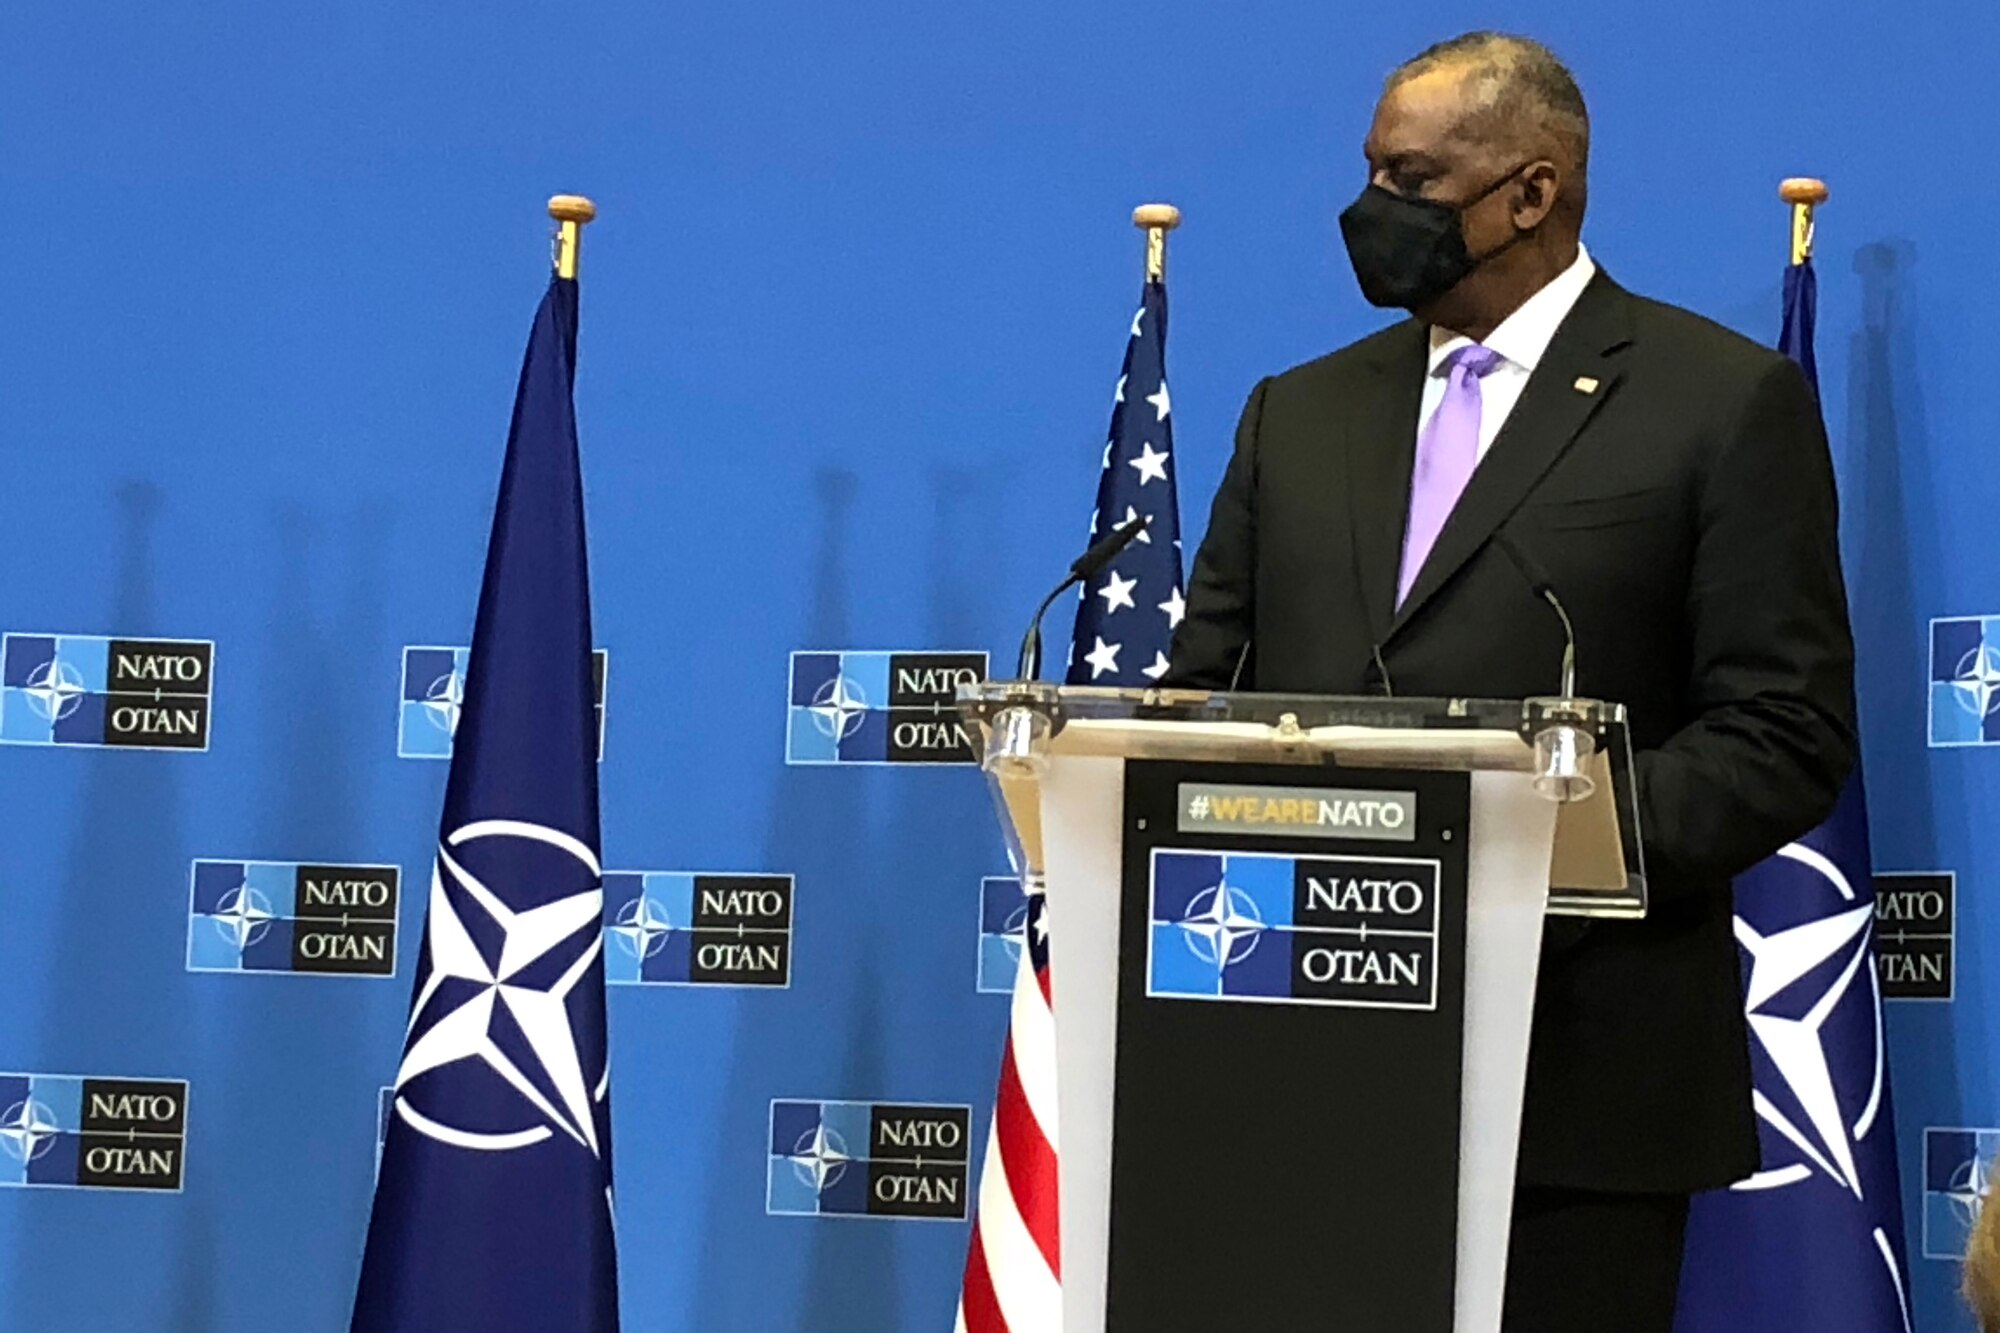 A man in business attire stands at a lectern with microphones and U.S. and NATO flags behind him.